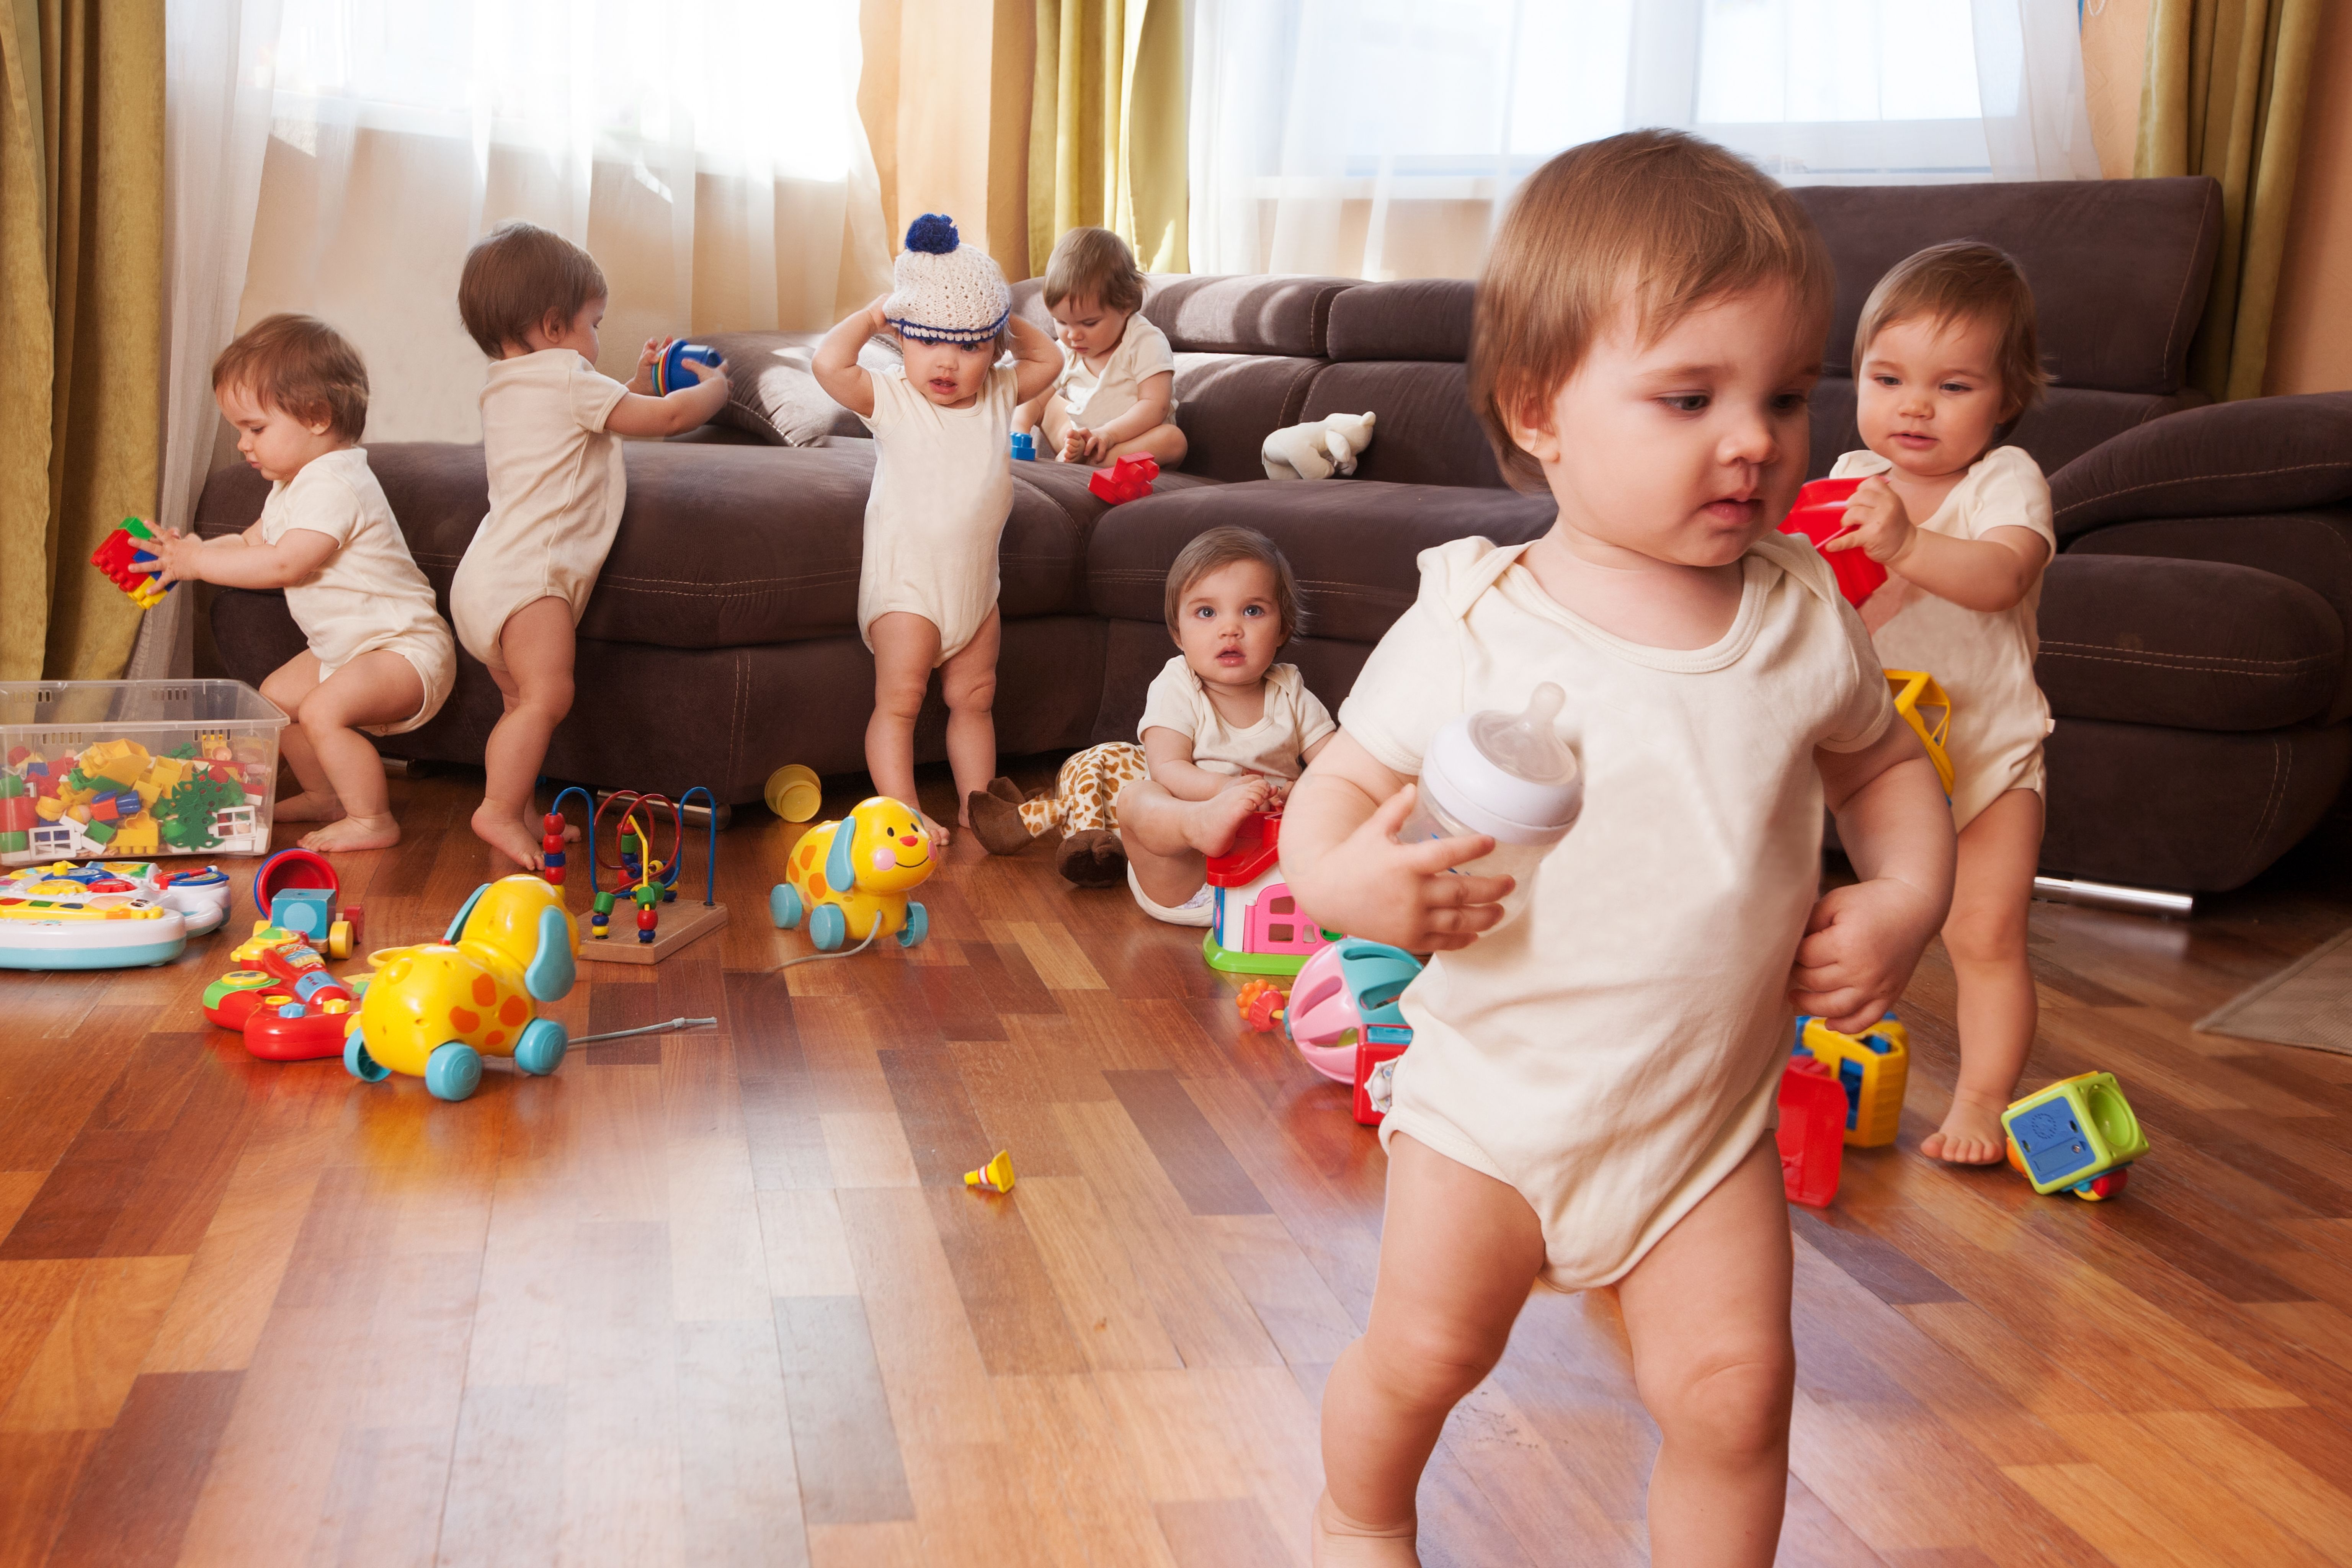 Many toddlers playing | Source: Shutterstock